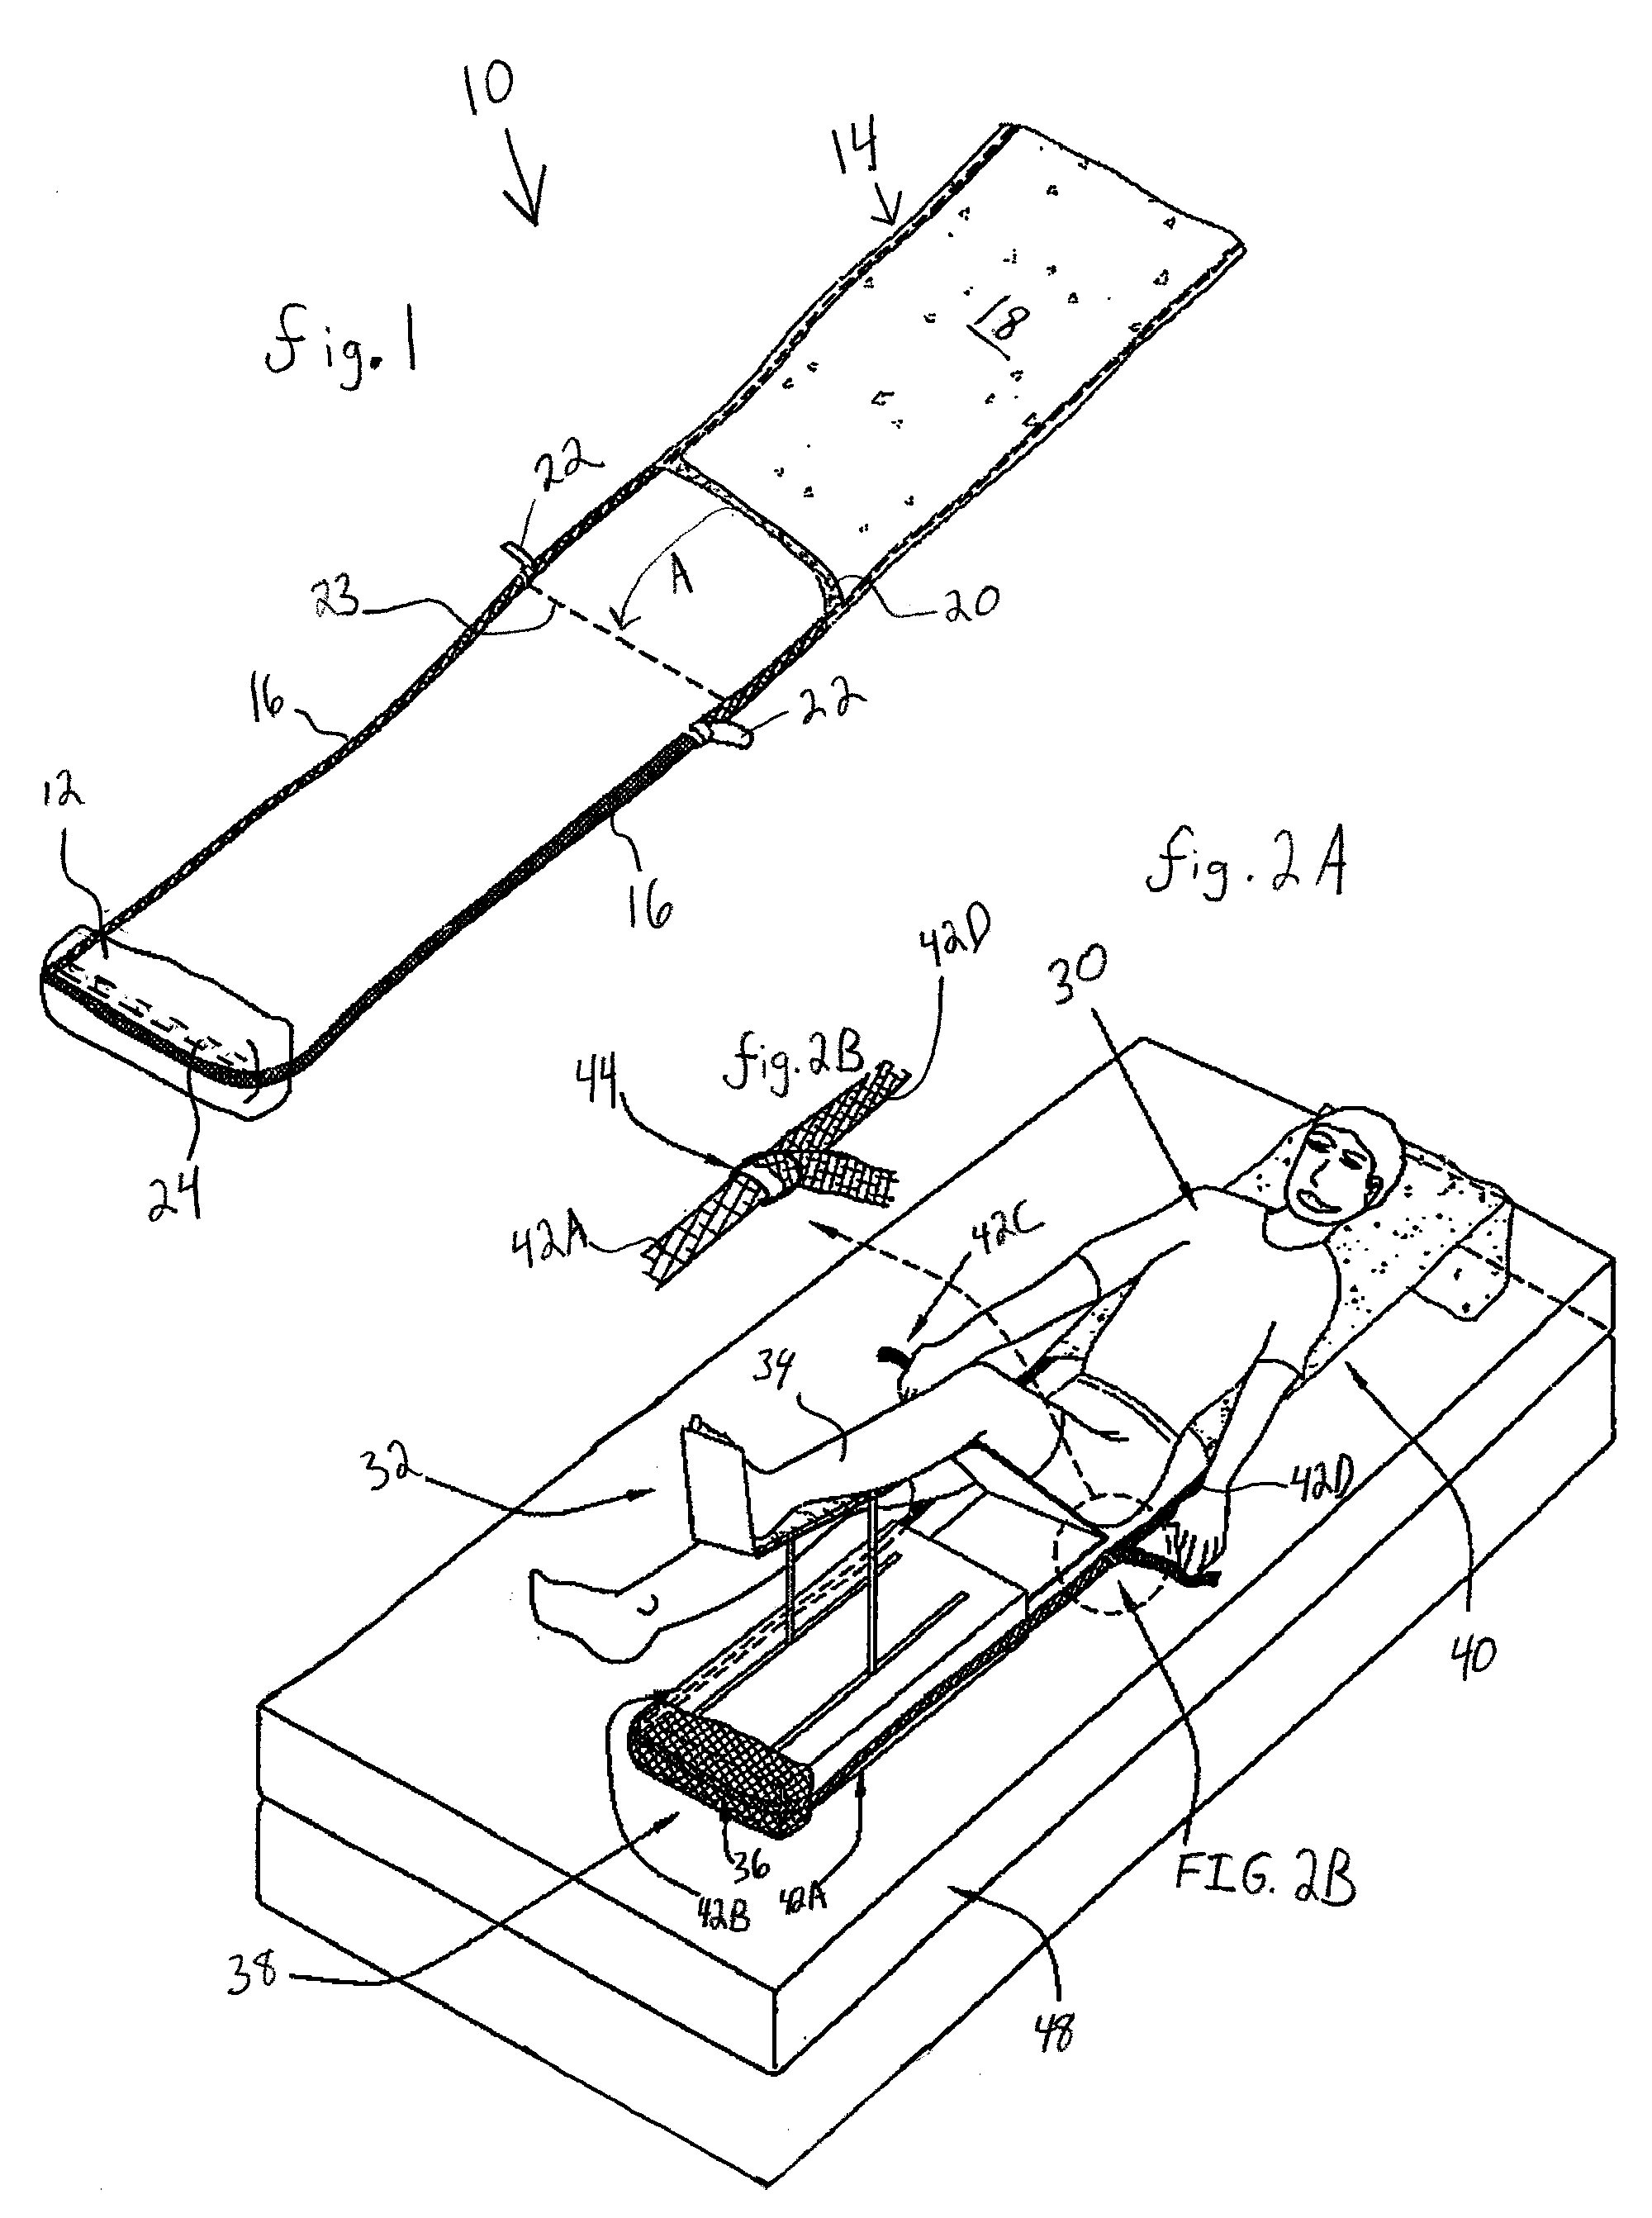 Slip-Stop Device for Continuous Passive Motion Machines